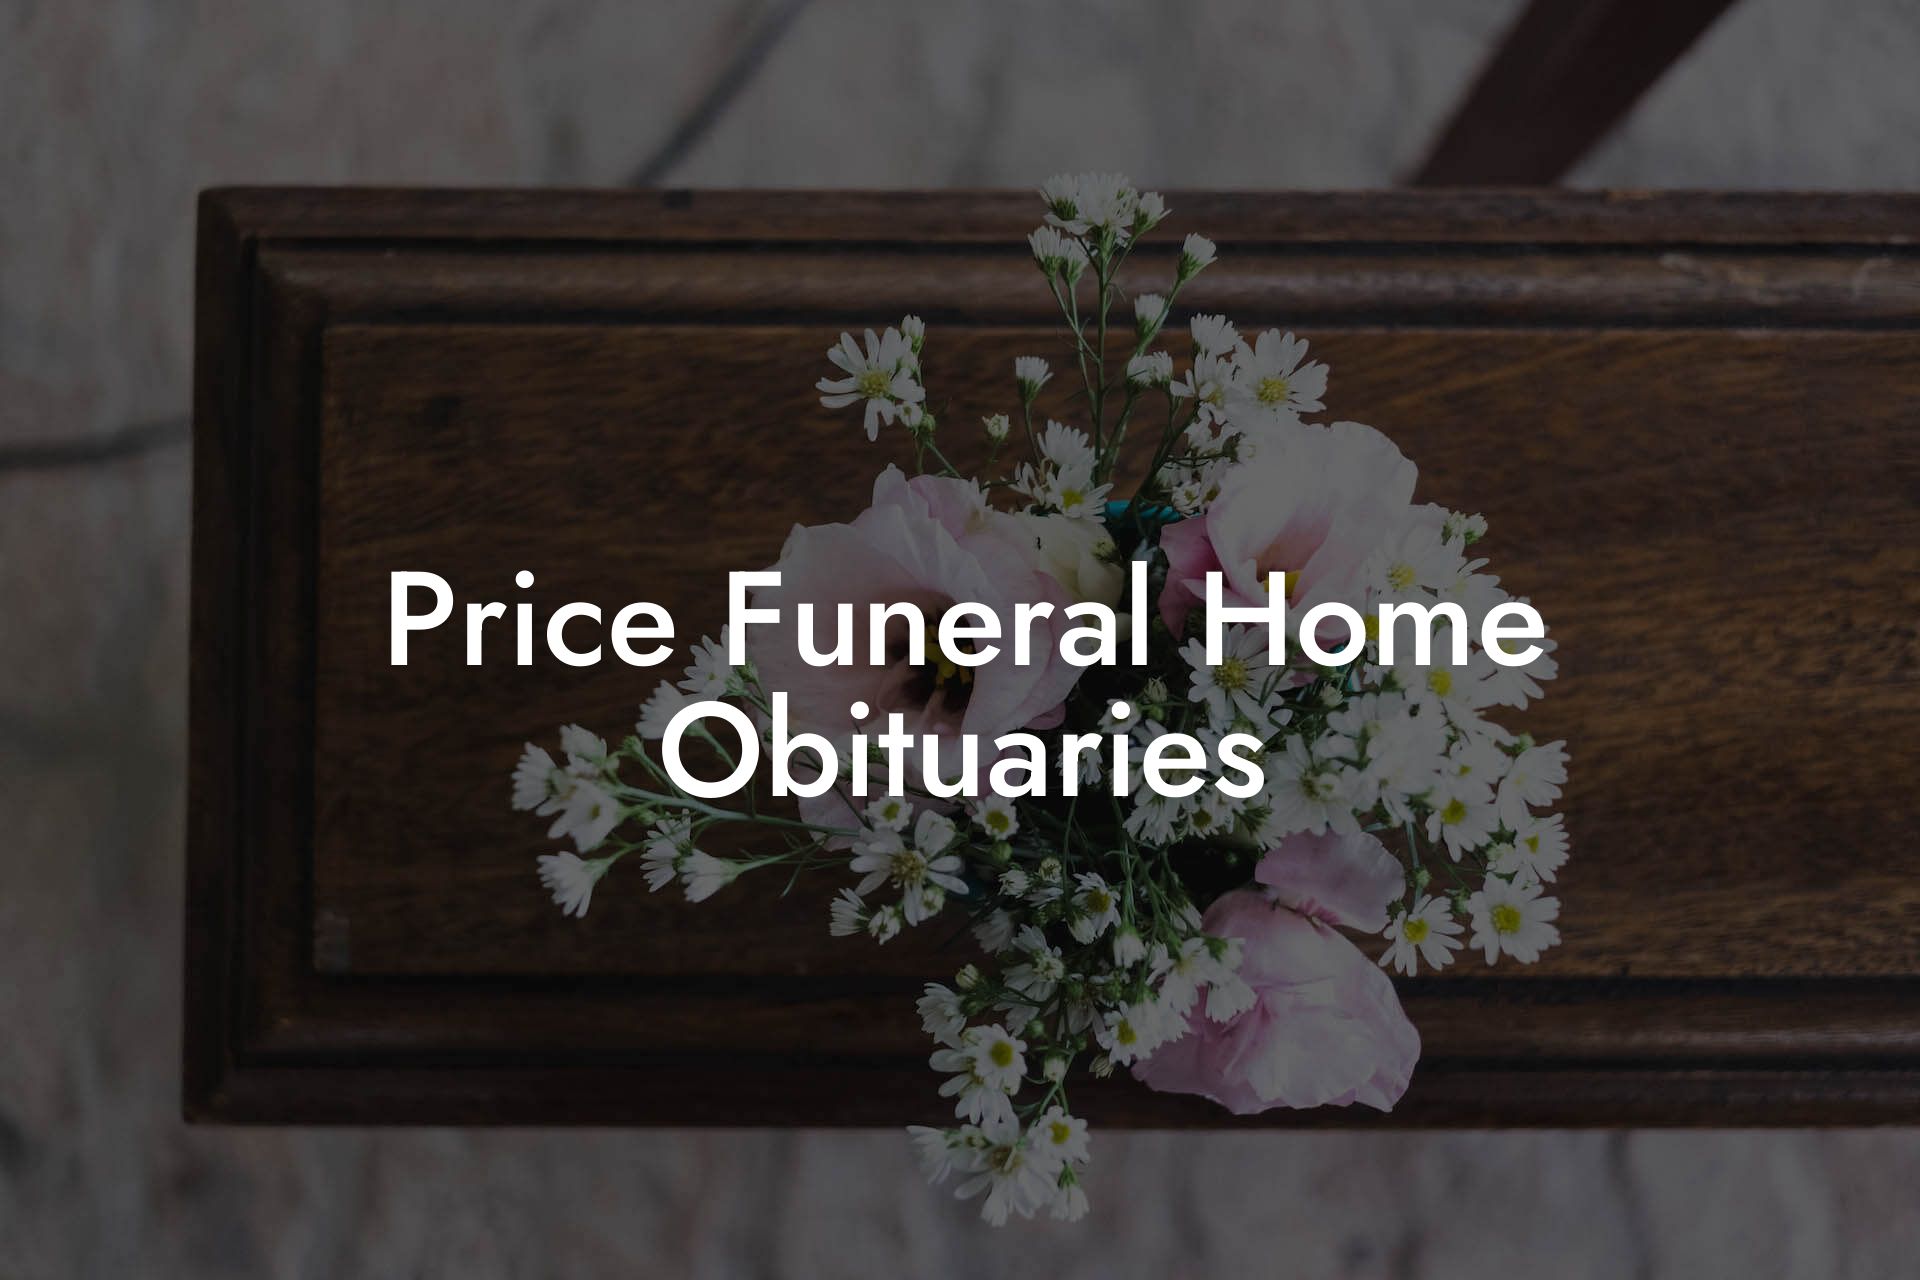 Price Funeral Home Obituaries